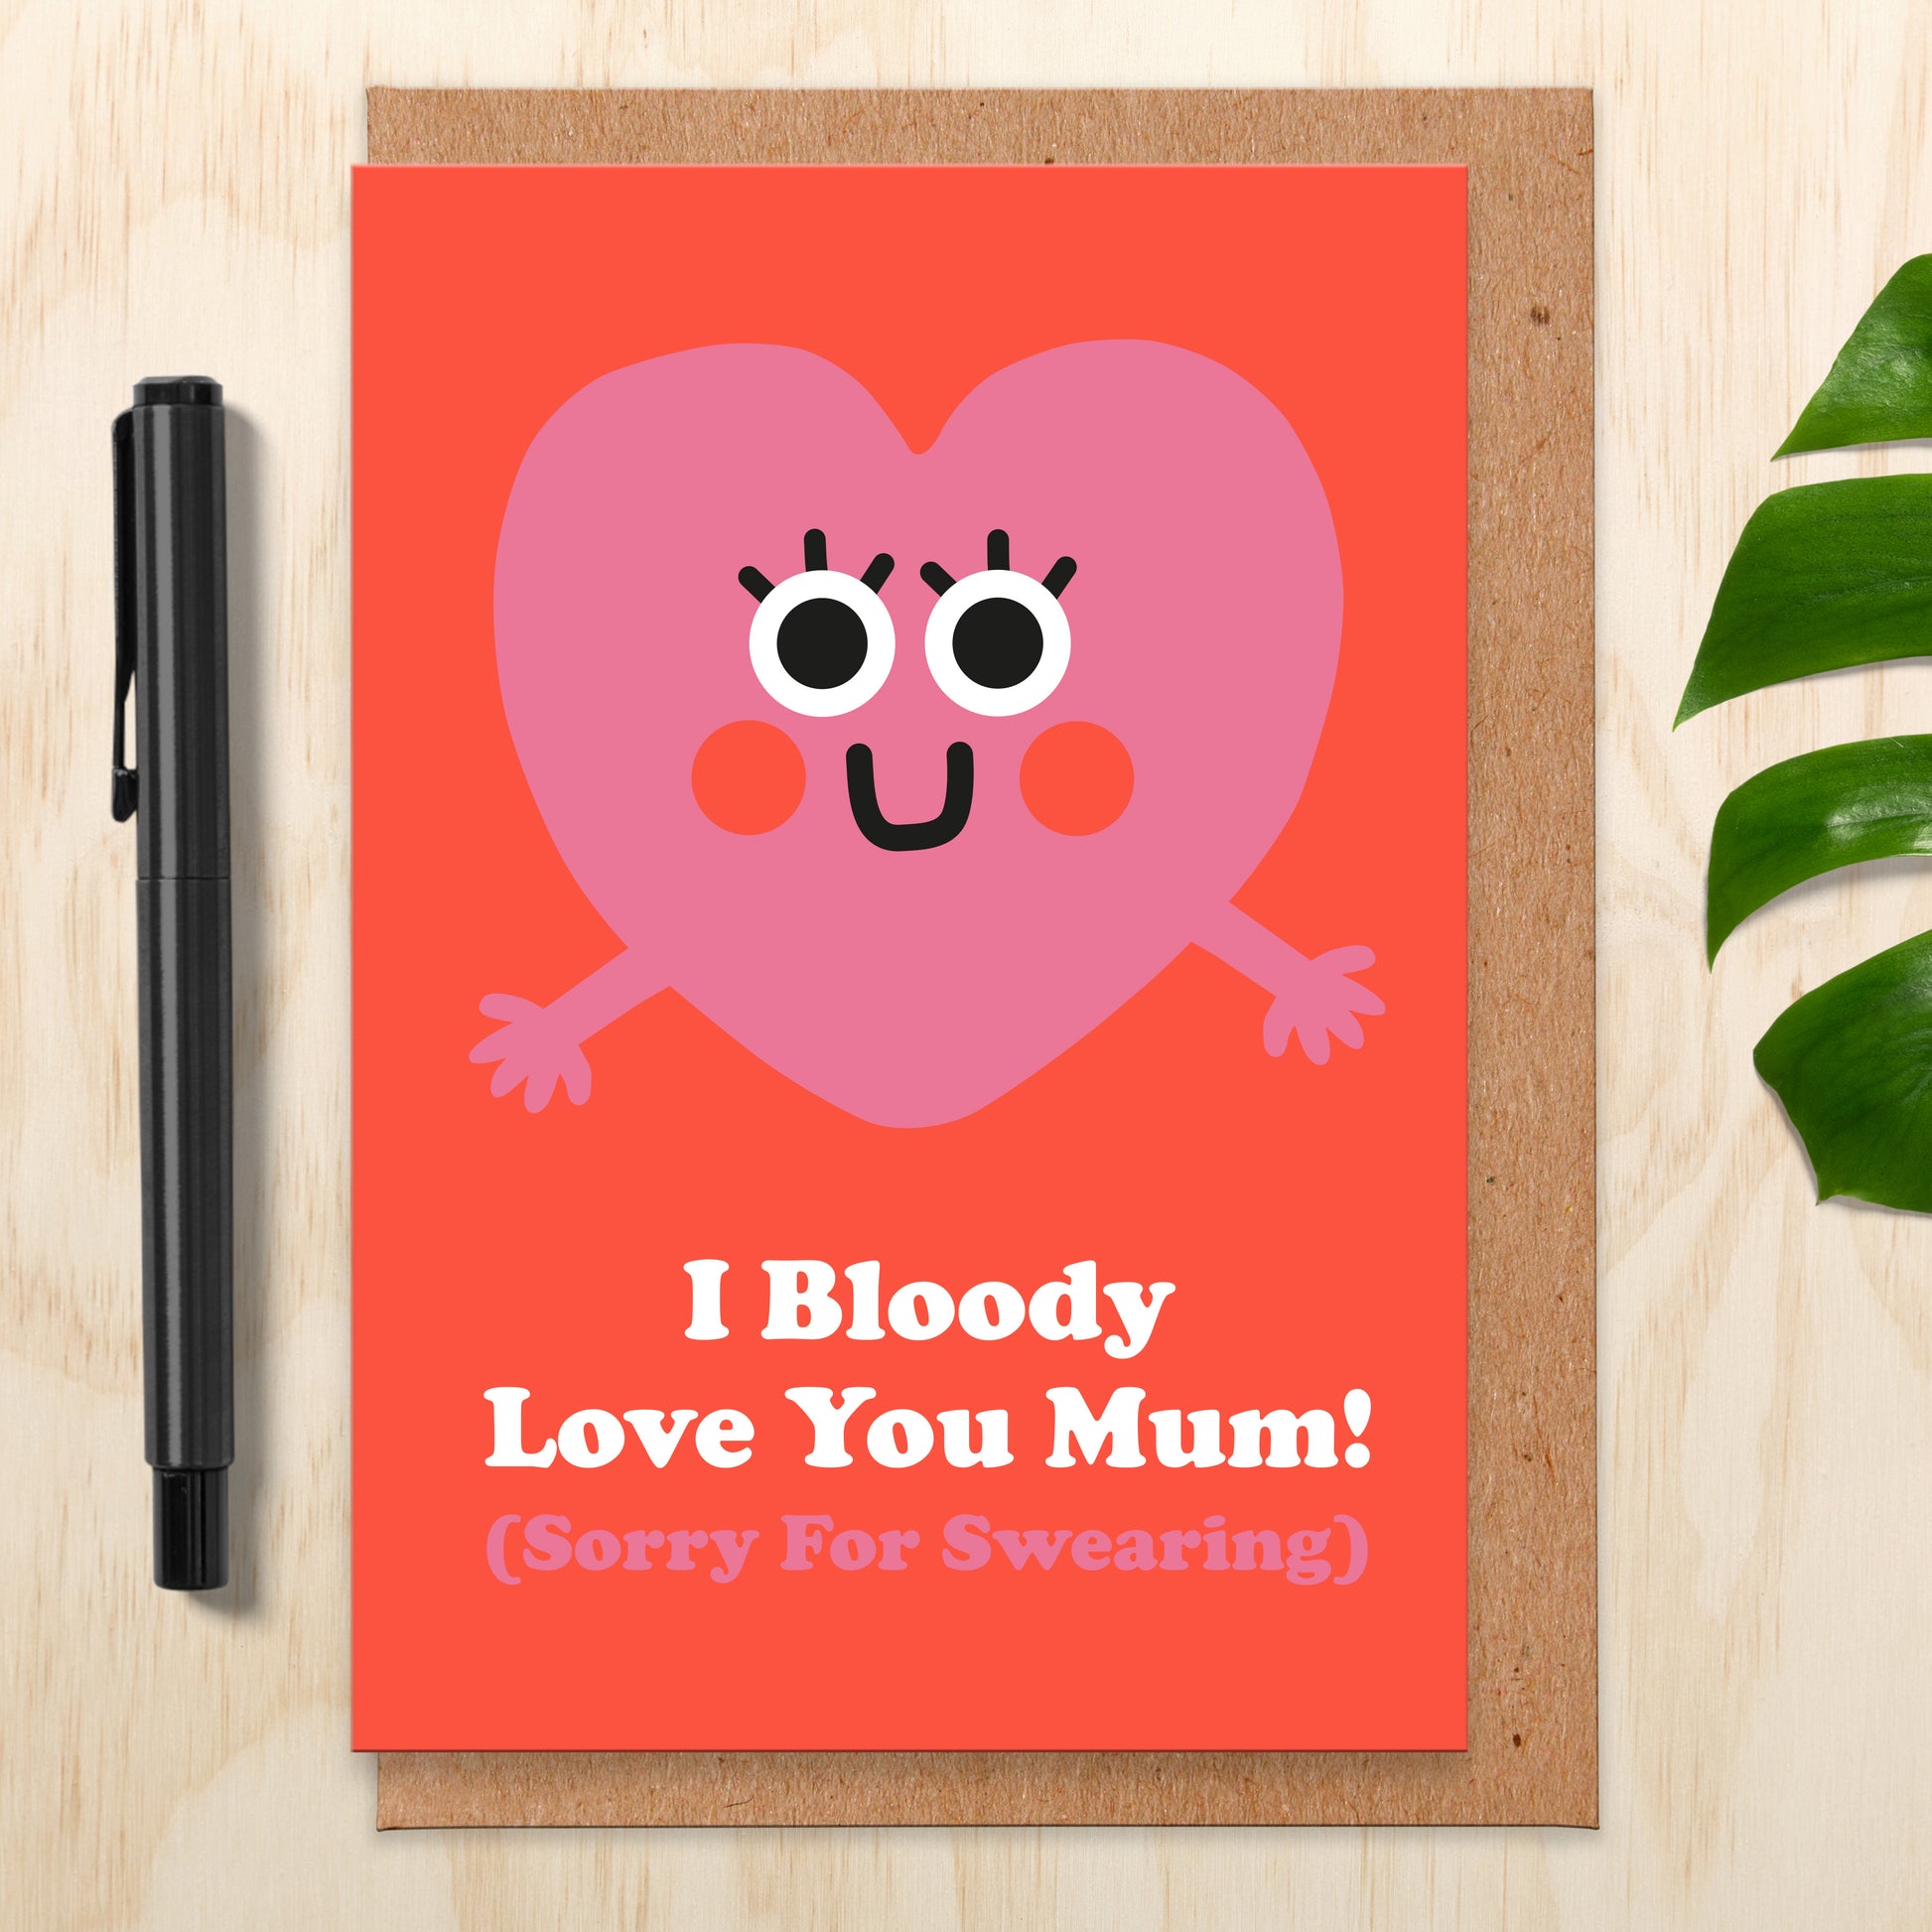 Mother's day card that says I Bloody Love You Mum! and has an illustration of a heart with hands